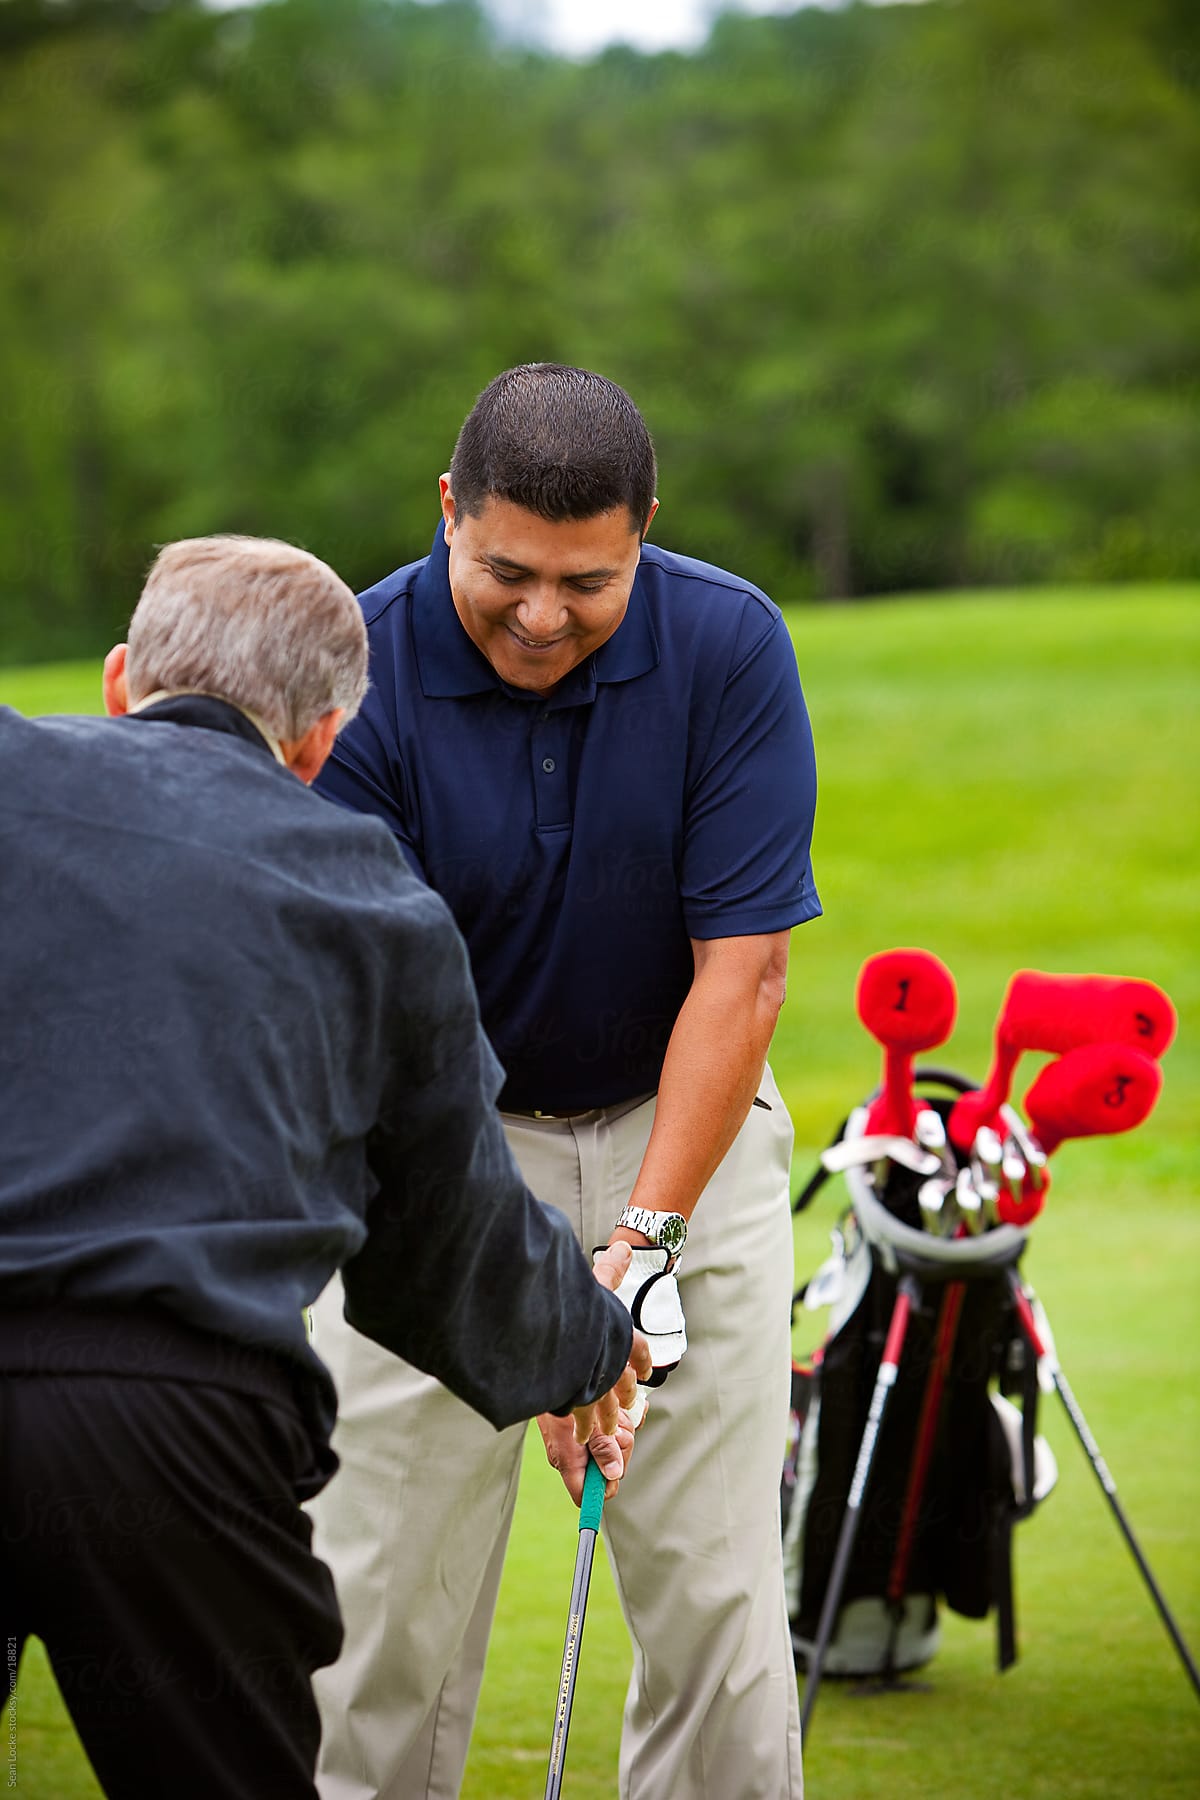 Golf: Golf Instructor Showing the Proper Technique